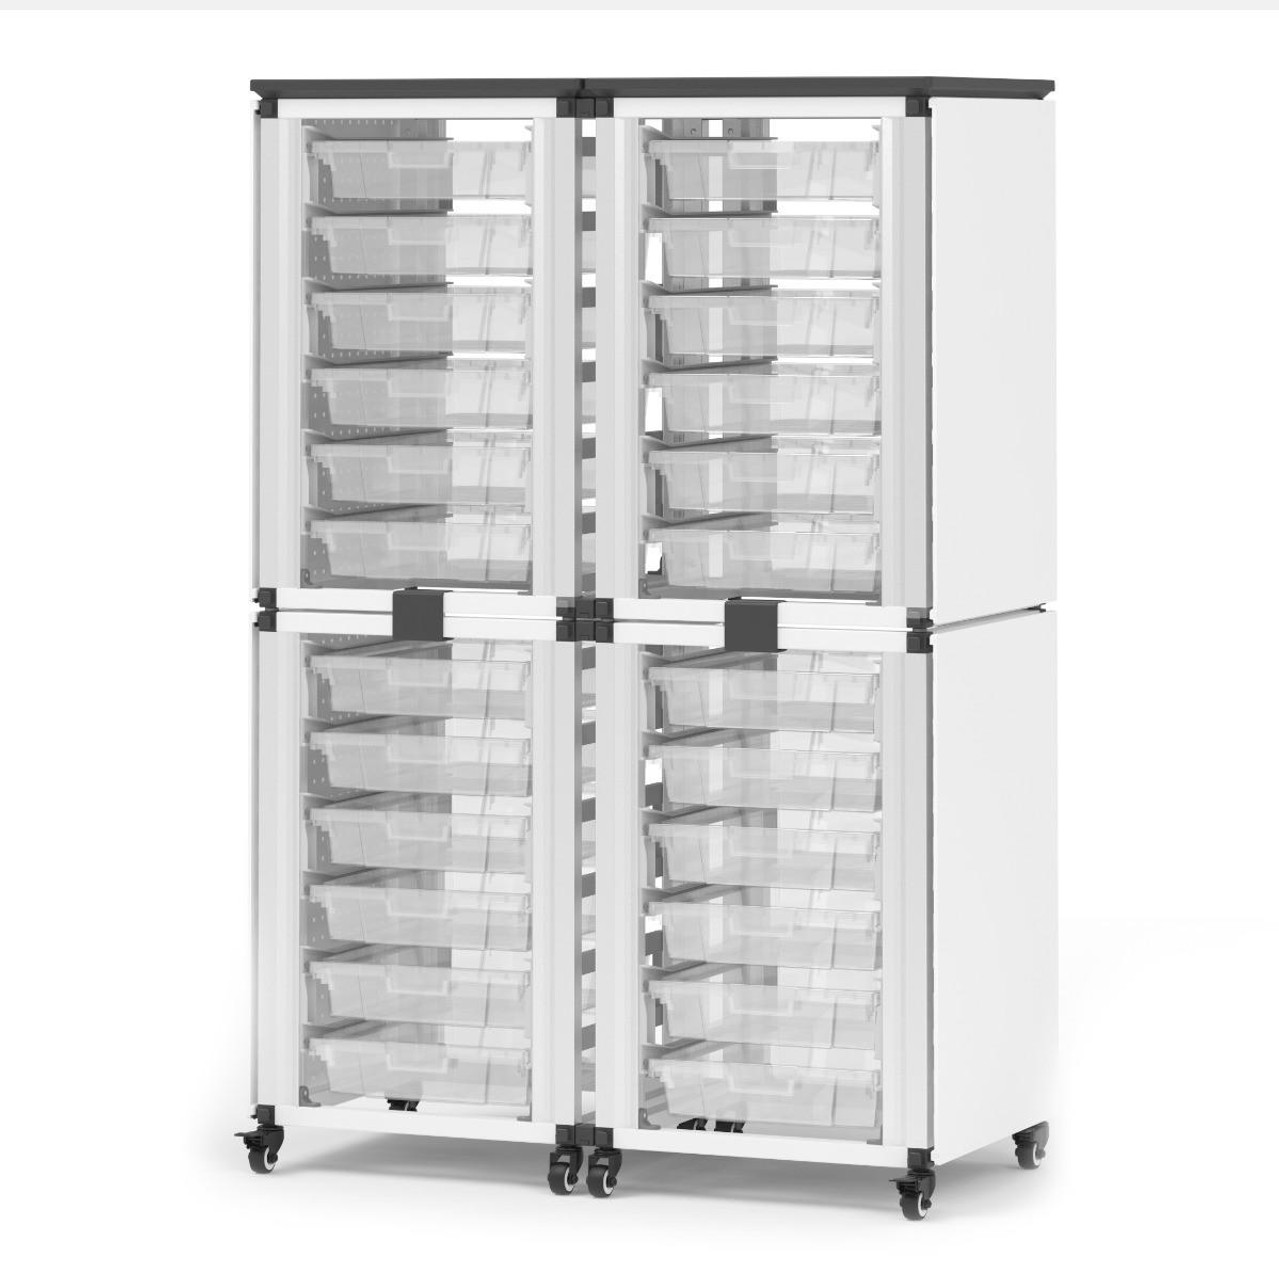 https://cdn11.bigcommerce.com/s-36yz7qwnyo/images/stencil/1280x1280/products/26706/56327/luxor-modular-classroom-storage-cabinet-4-stacked-modules-with-24-small-bins__27702.1677468308.jpg?c=1